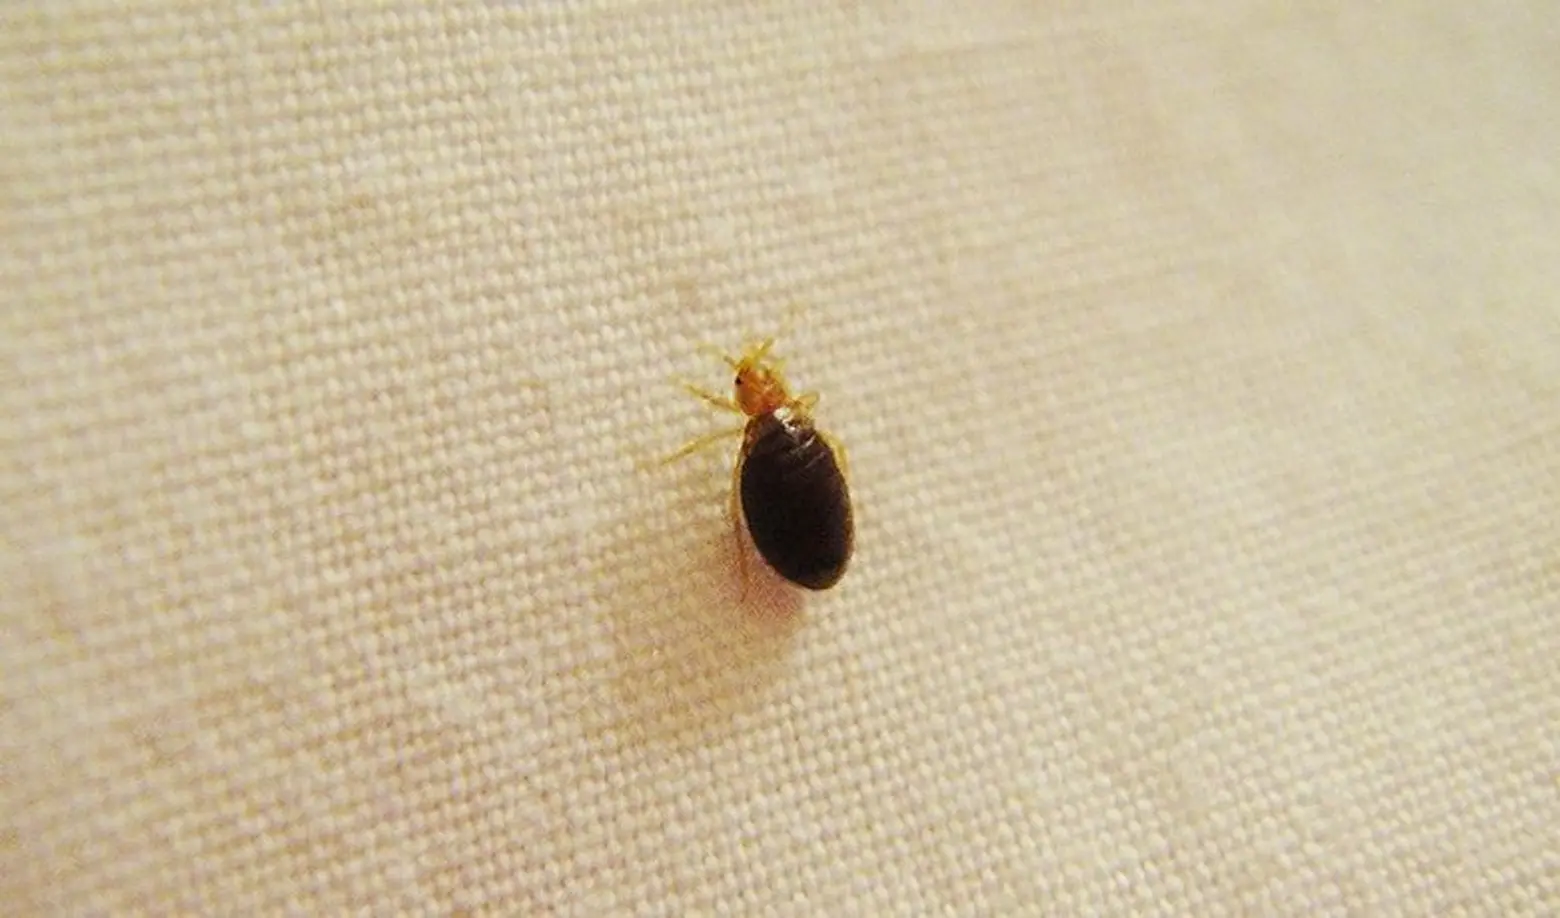 New bill would force landlords to disclose bedbug infestations